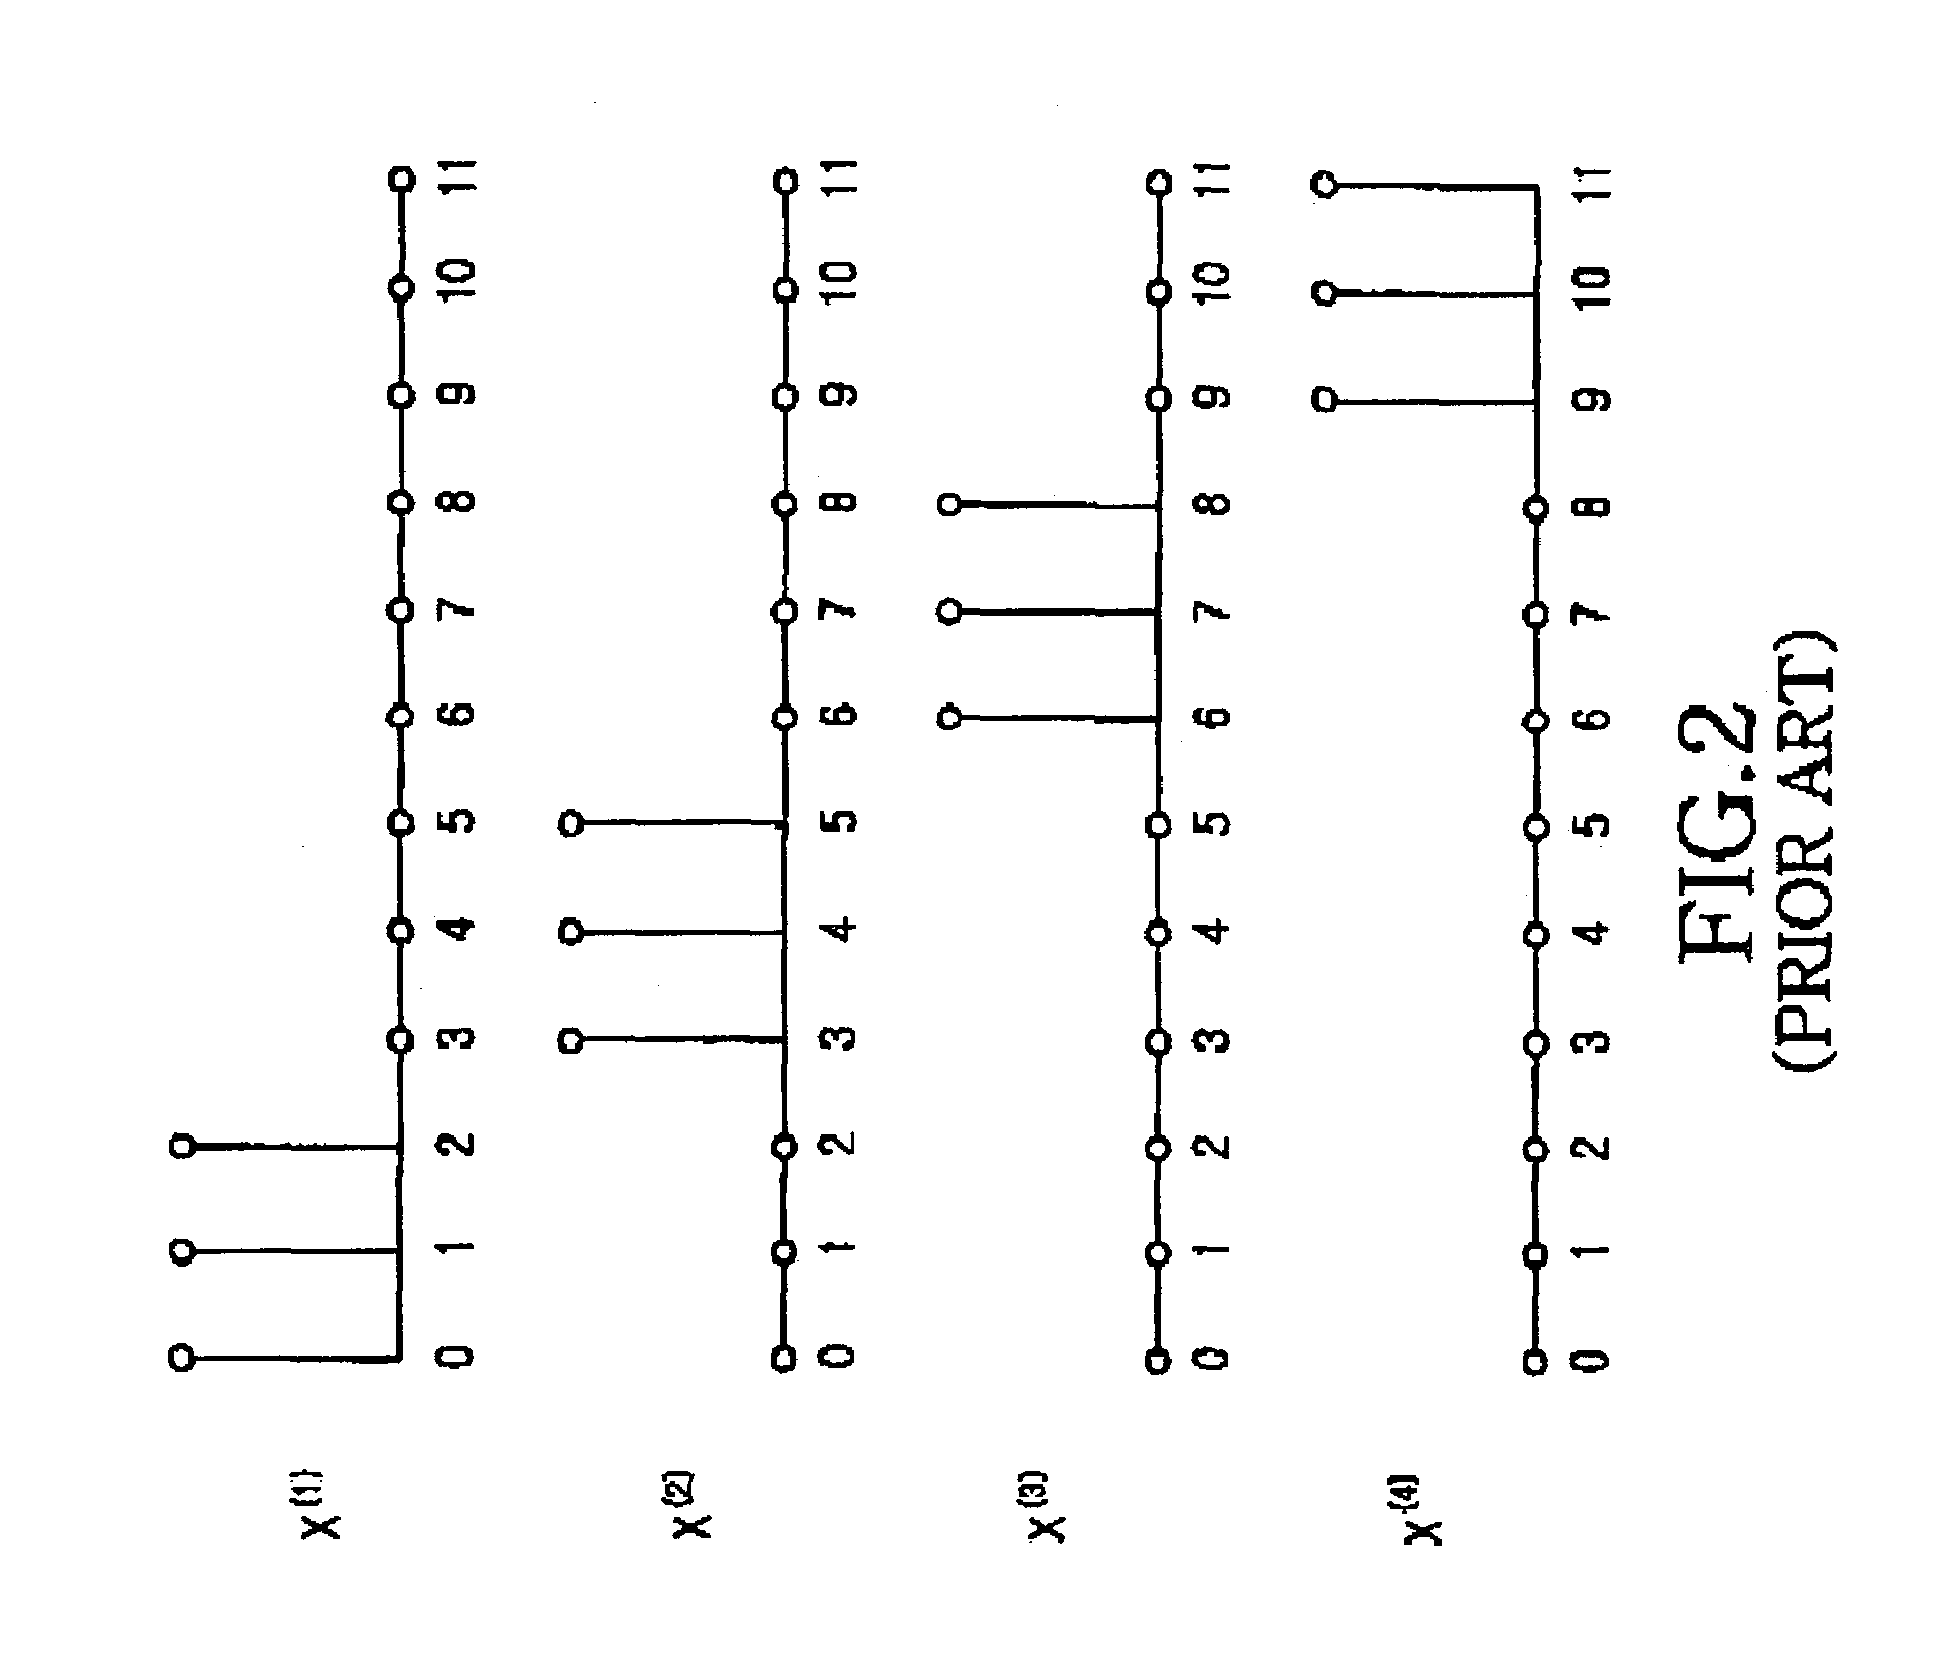 Apparatus and method for transmitting and receiving side information of a partial transmit sequence in an OFDM communication system